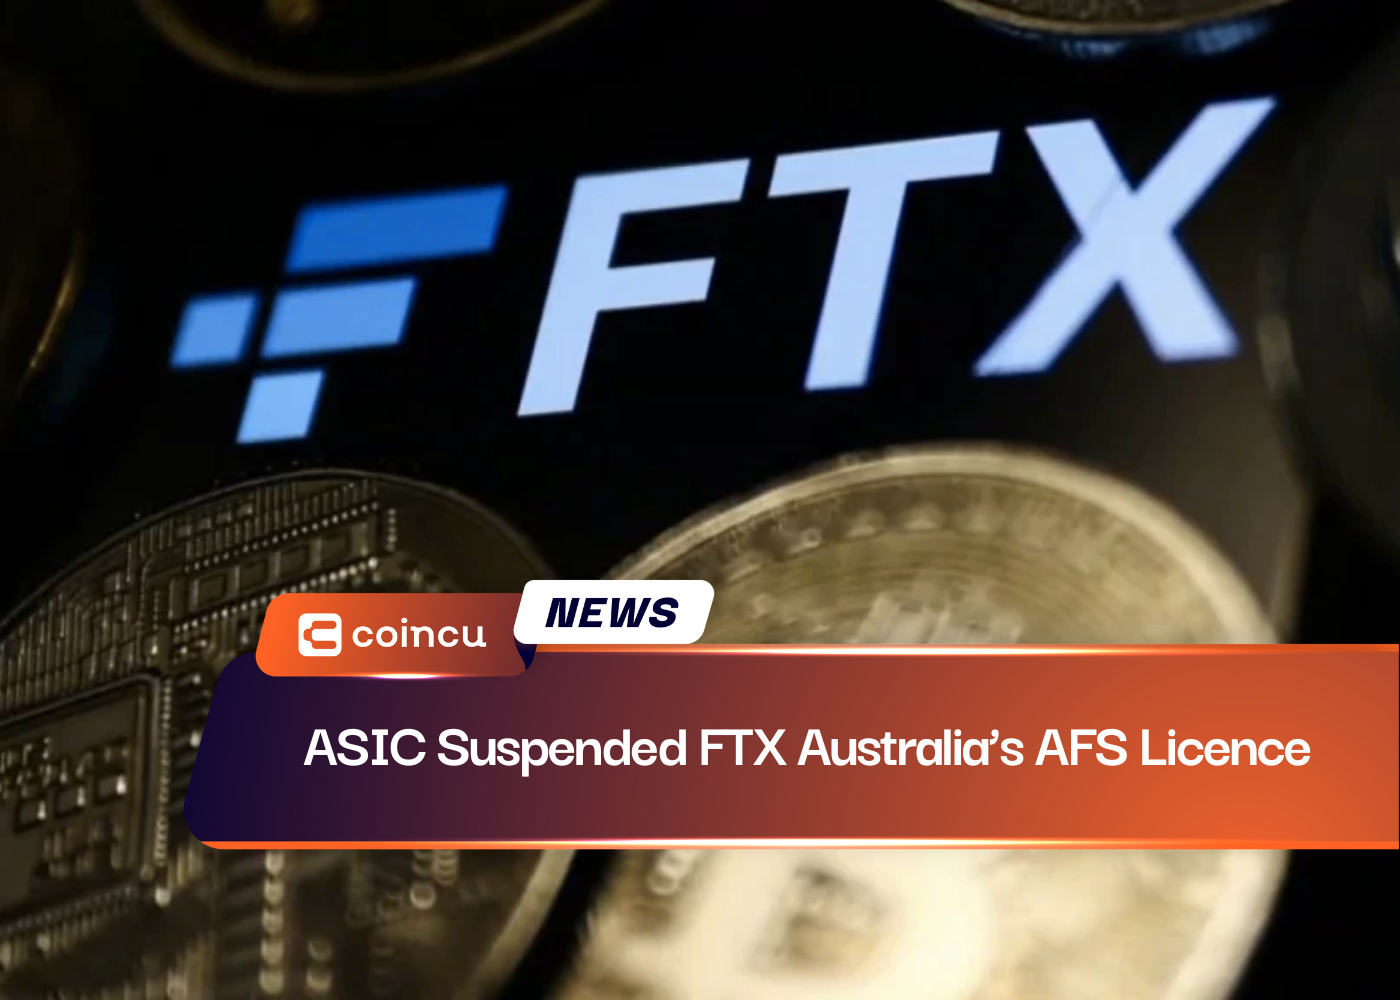 ASIC Suspended FTX Australia’s AFS Licence